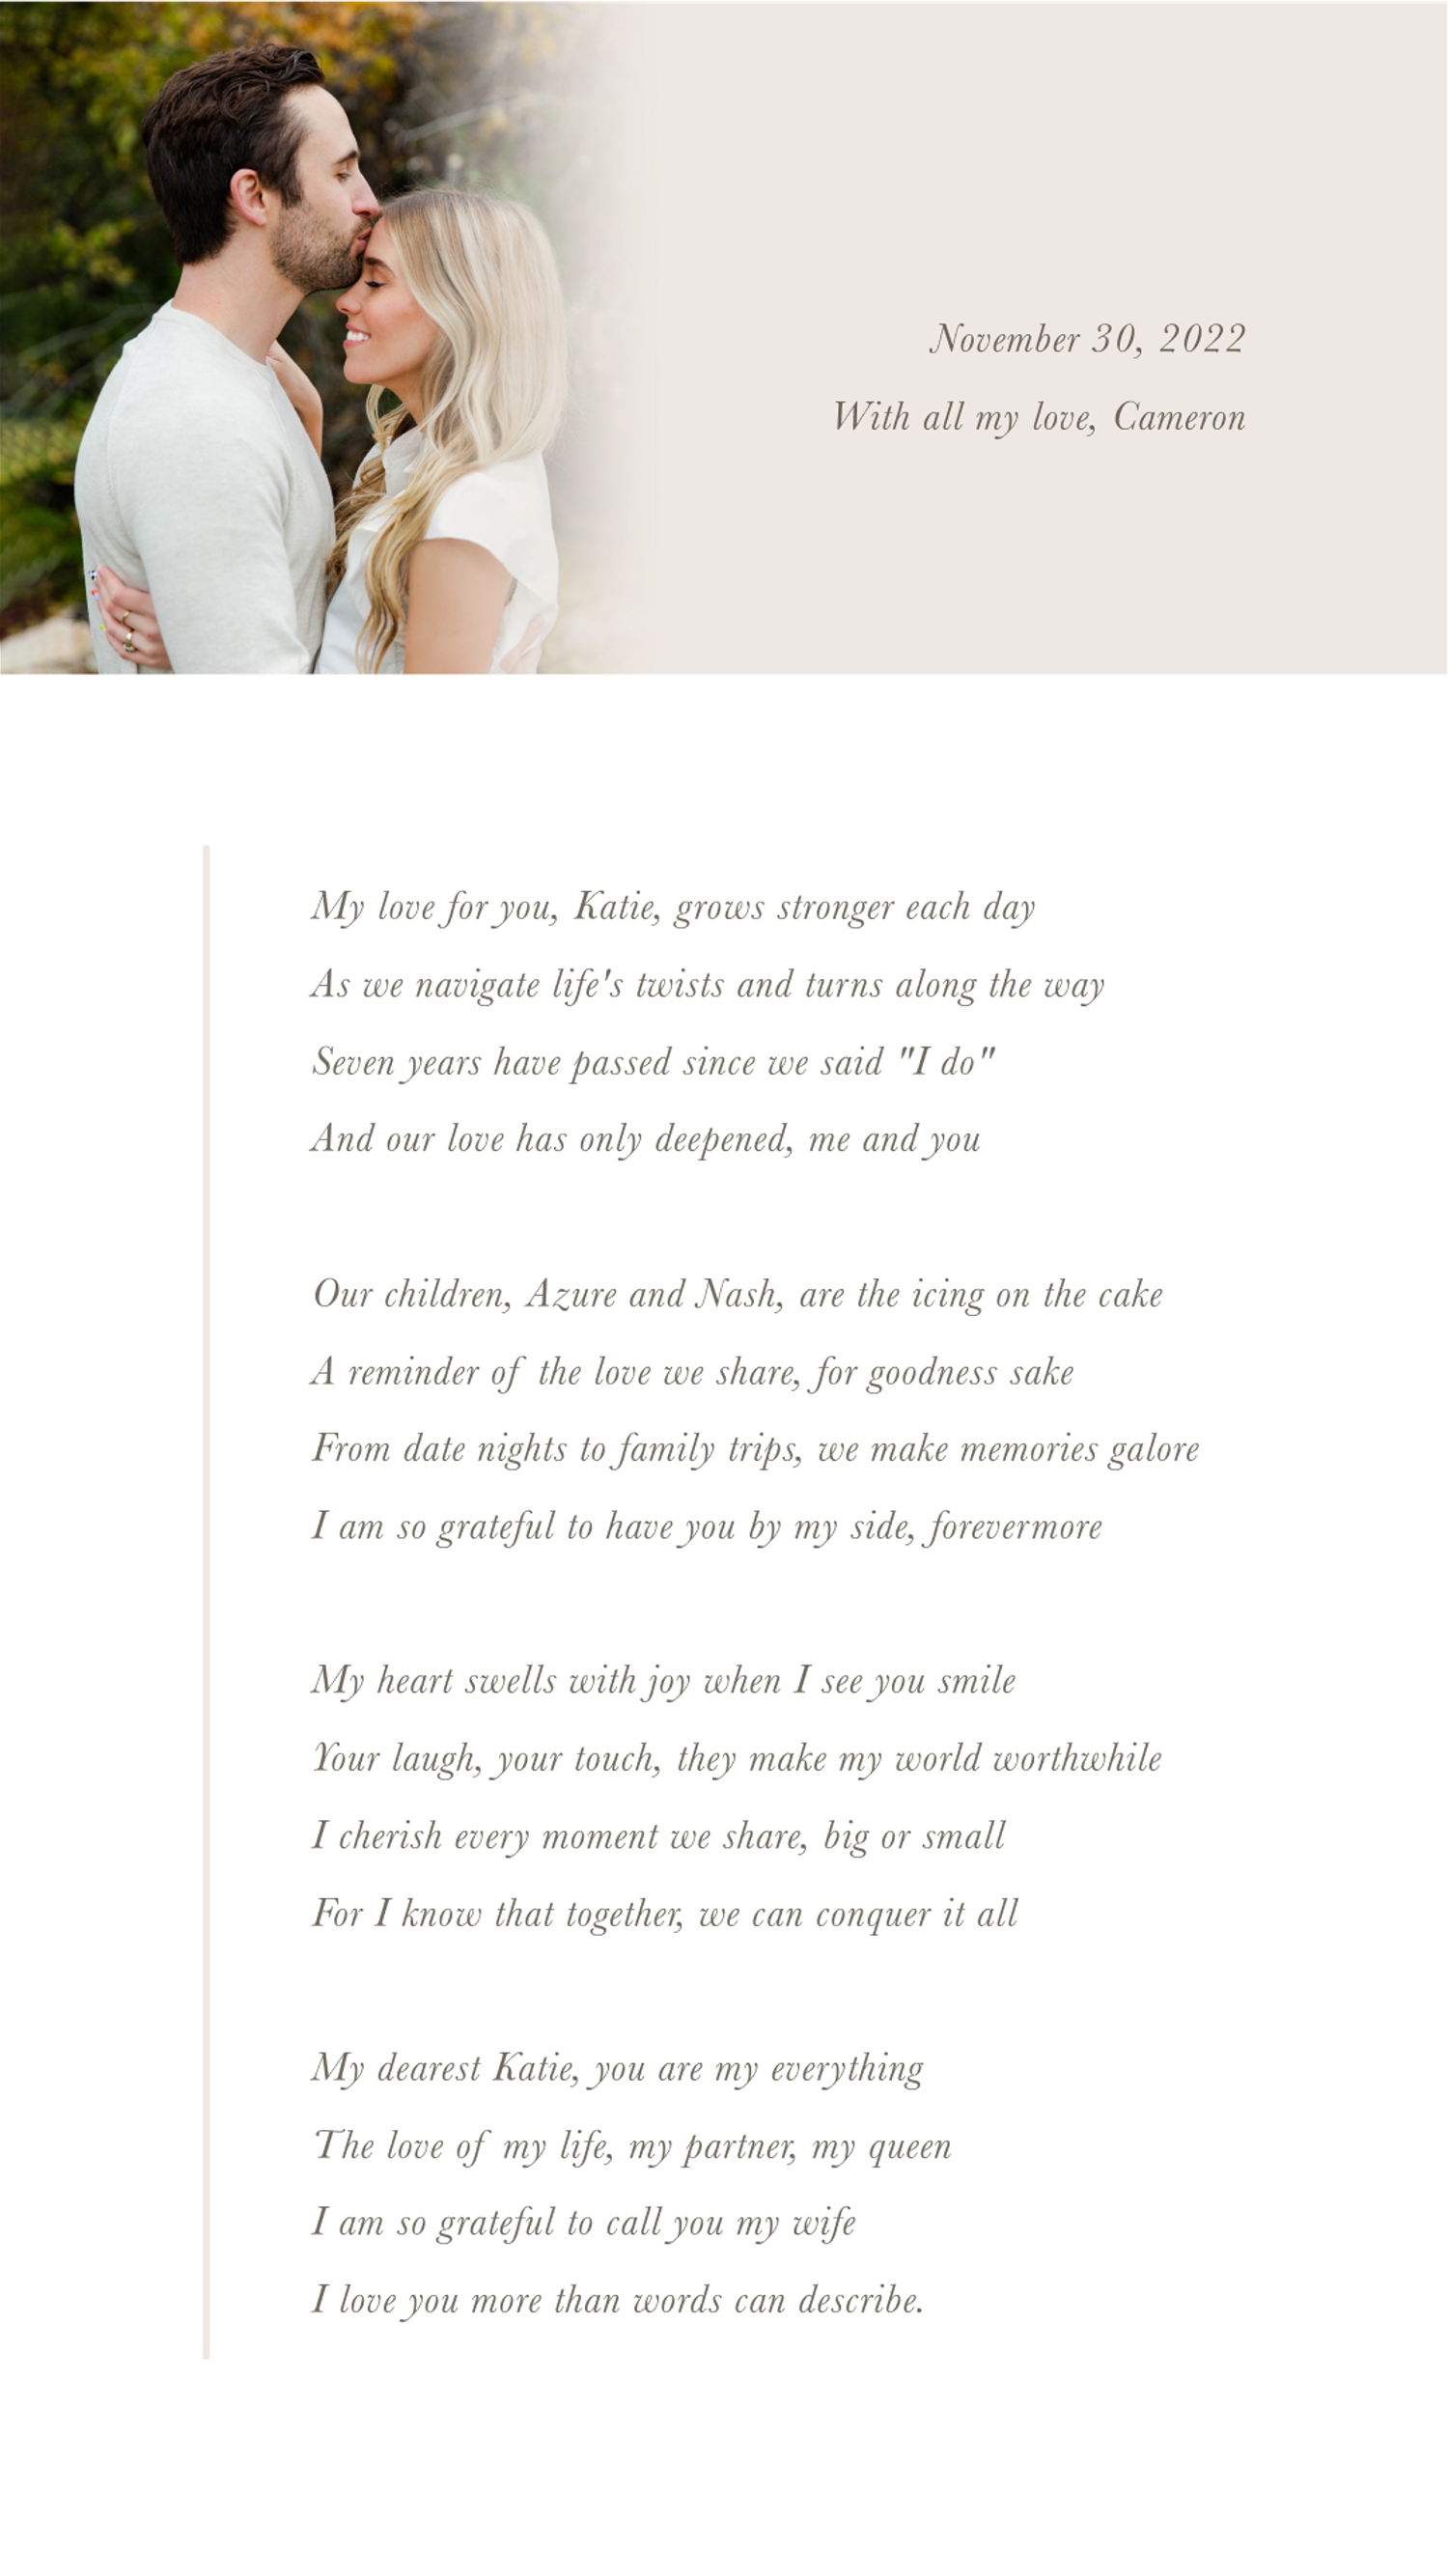 The first poem created using LoveLines.xyz